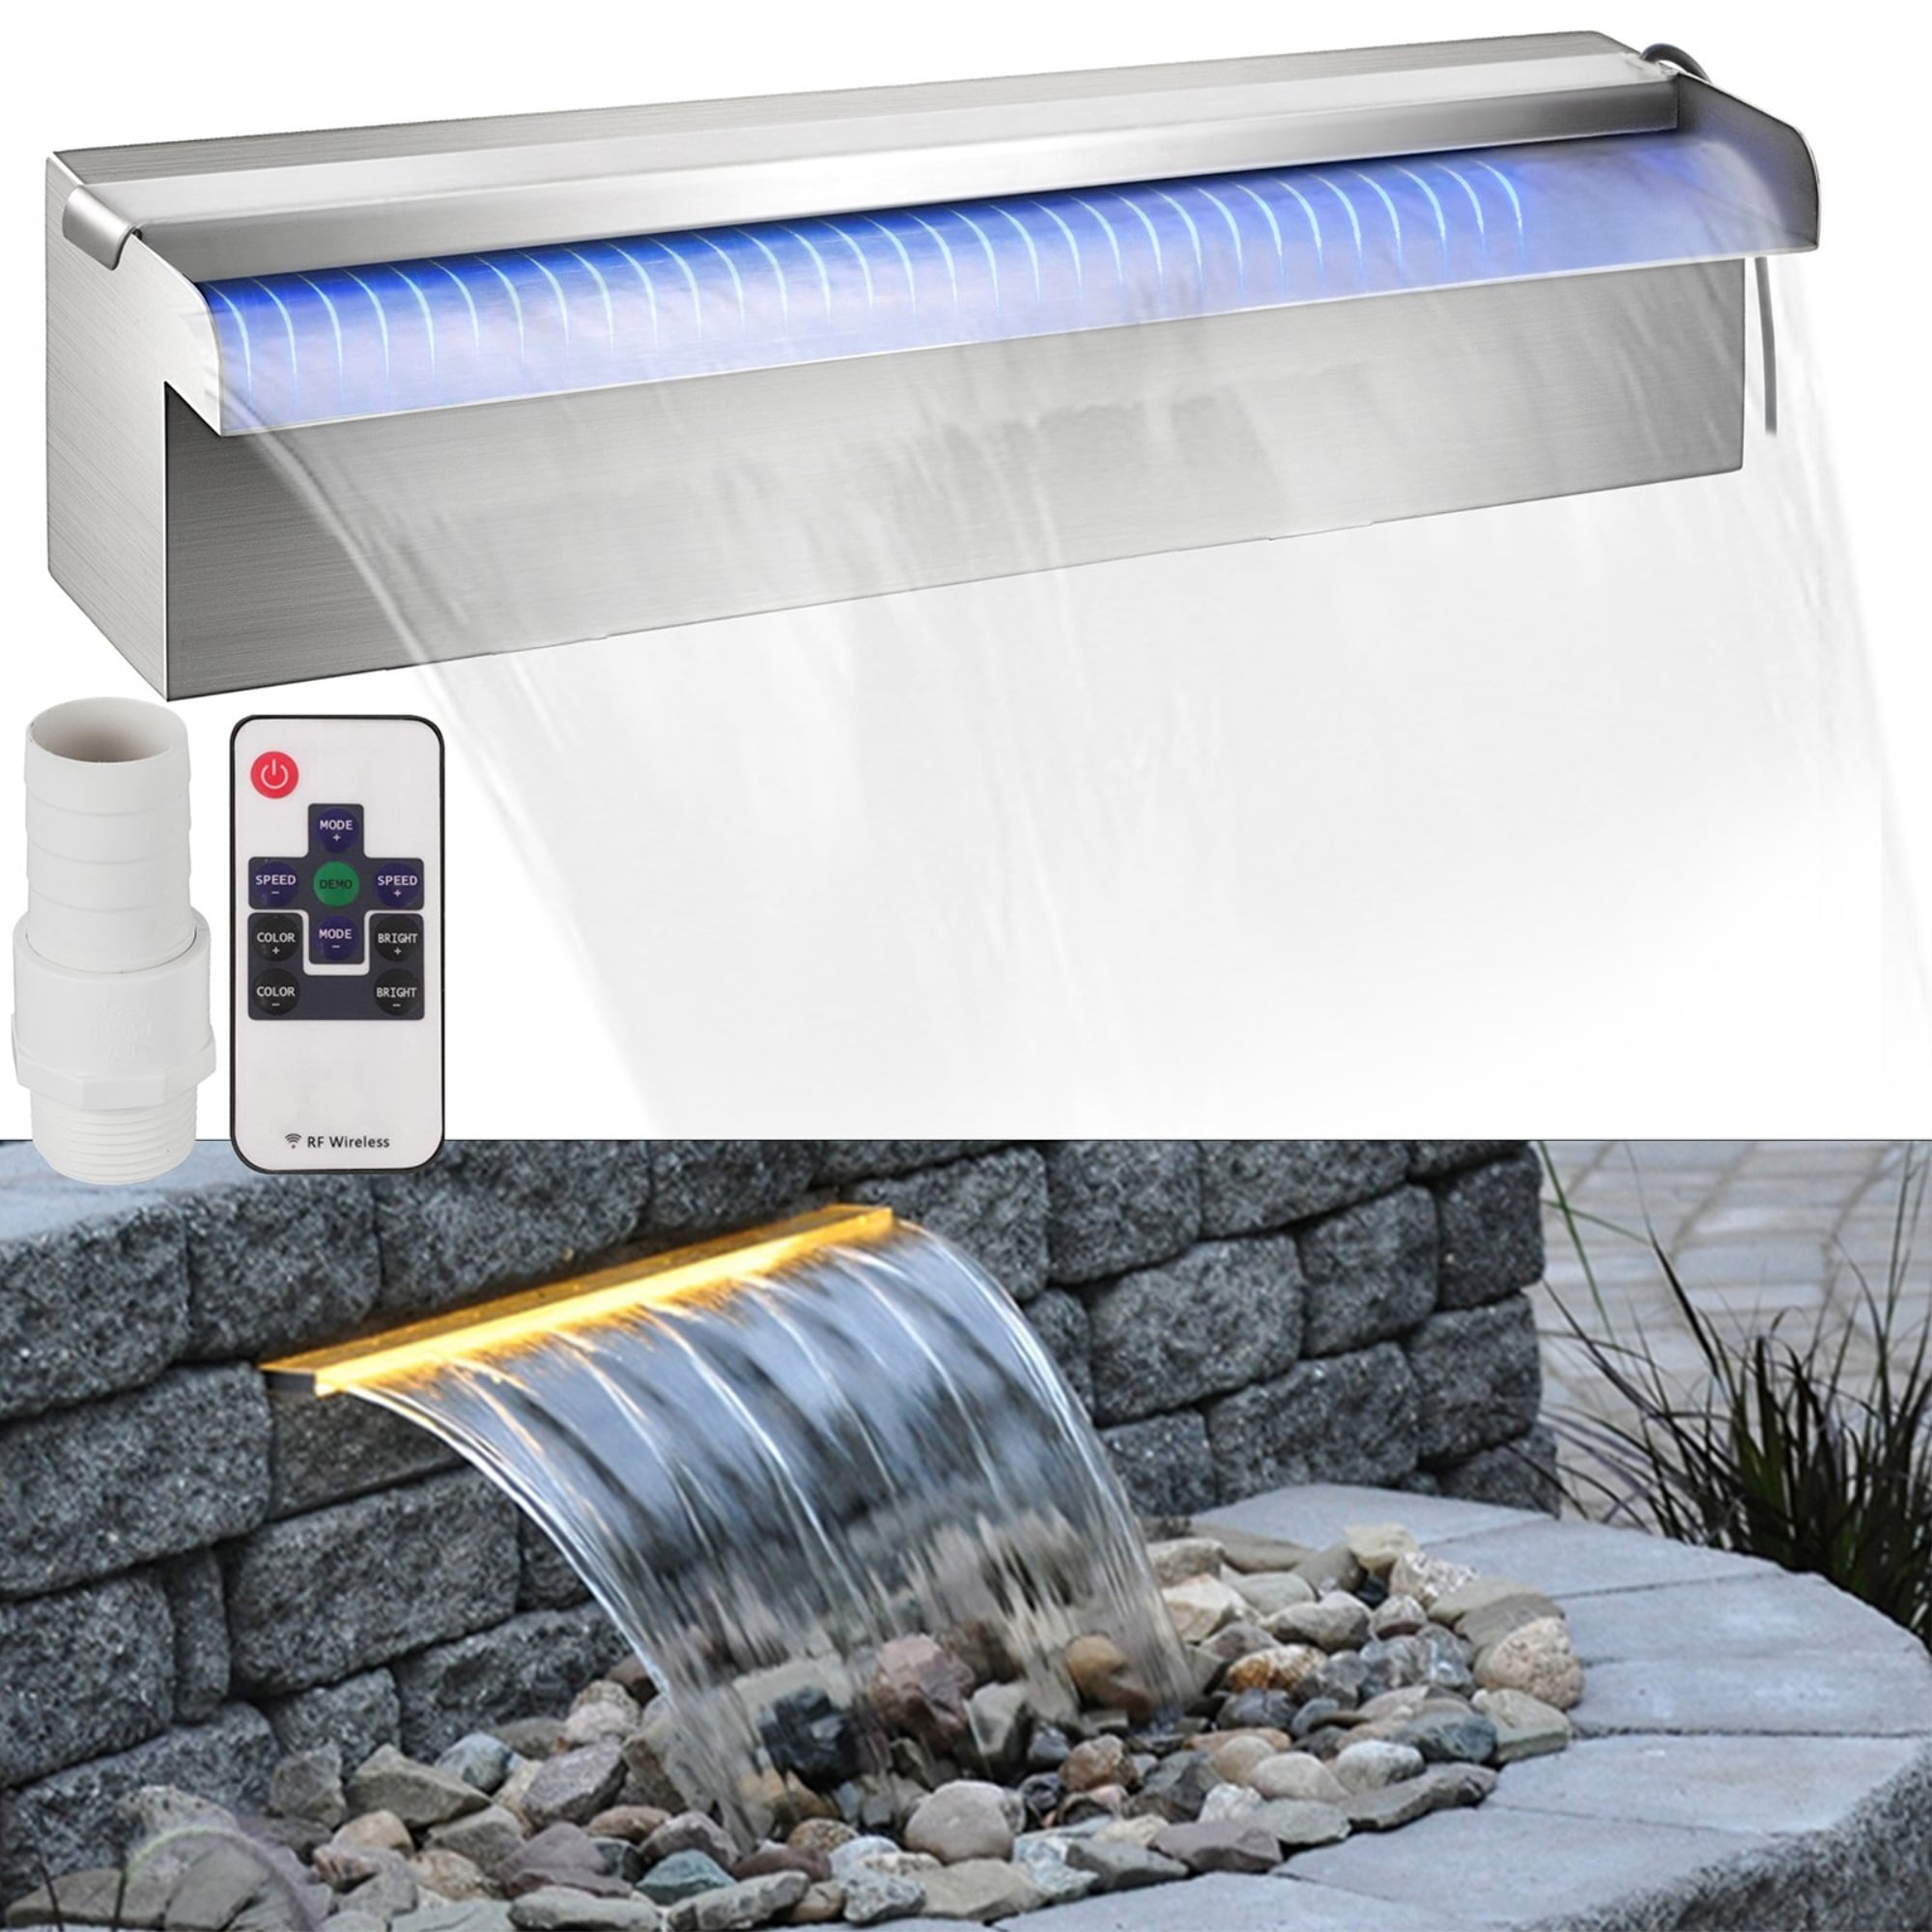 Details about   Garden Outdoor Waterfall Pool Fountain Stainless Steel Rectangular 11.8"-59"